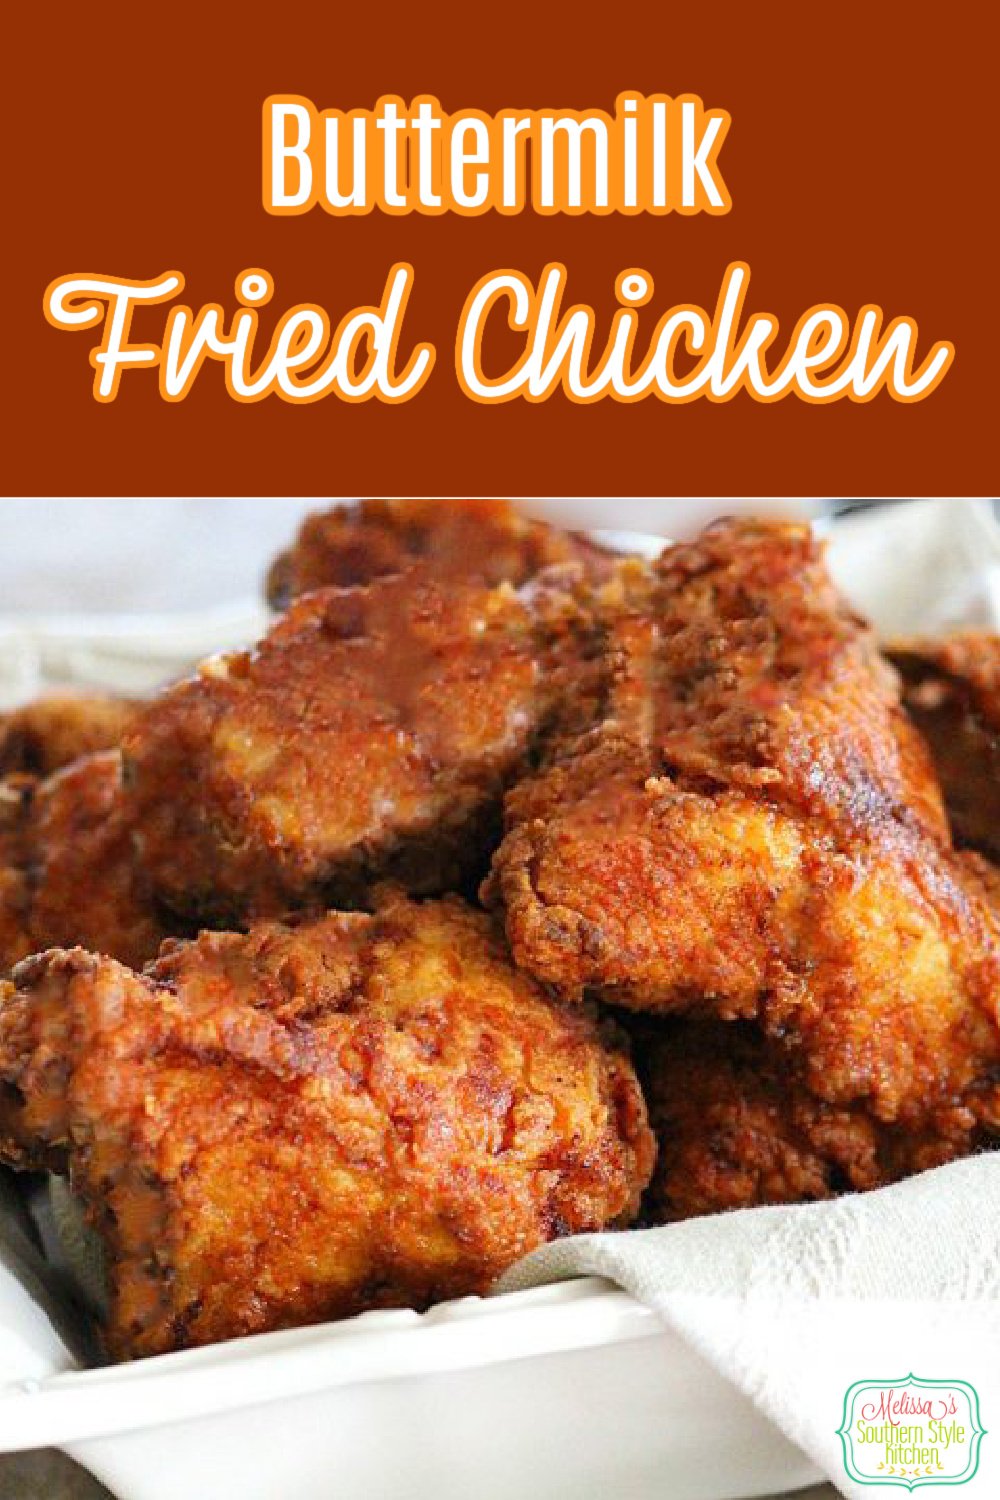 This Southern Buttermilk Fried Chicken recipe is juicy on the inside with a crispy coating that's finger licking good. #friedchicken #buttermilkfriedchicken #friedchickenrecipes #southernfriedchicken #buttermilkfriedchicken #chickenrecipes #dinner #dinnerideas #southernfood #southernrecipes #easyrecipes via @melissasssk